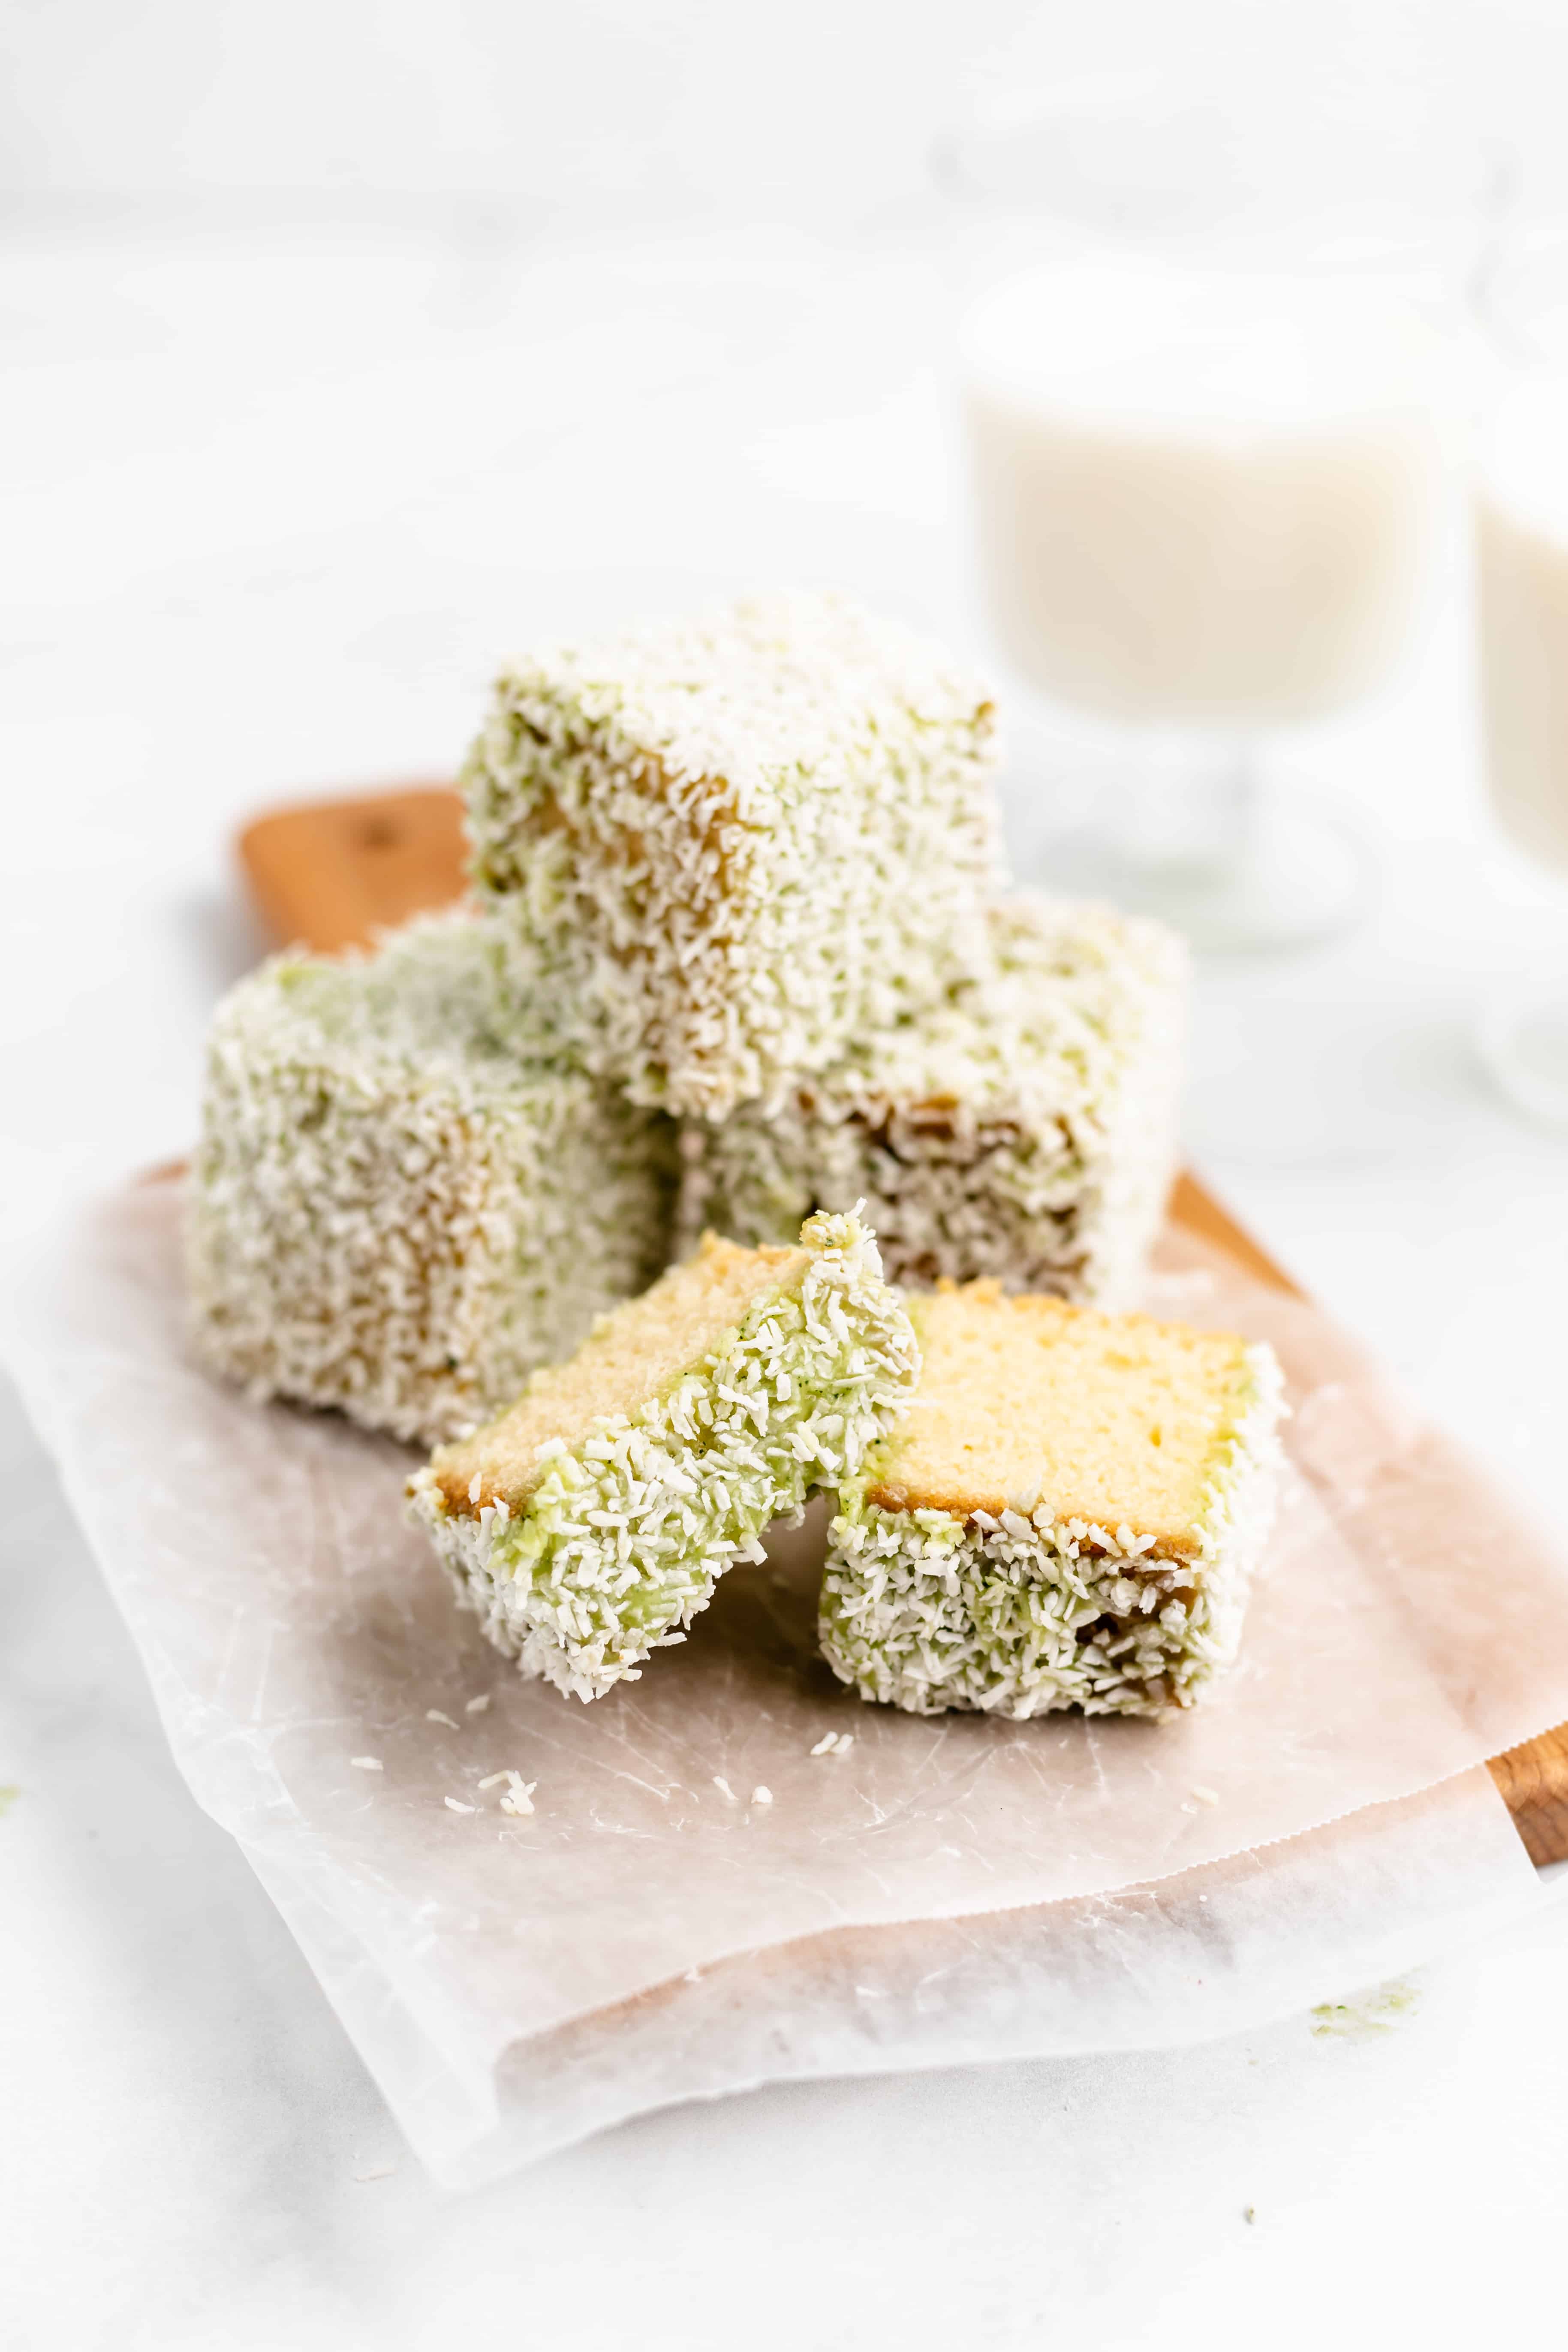 White Chocolate Matcha Lamington - sweet, buttery, and delicious. Perfect with a cup of tea! #lamington #hightea